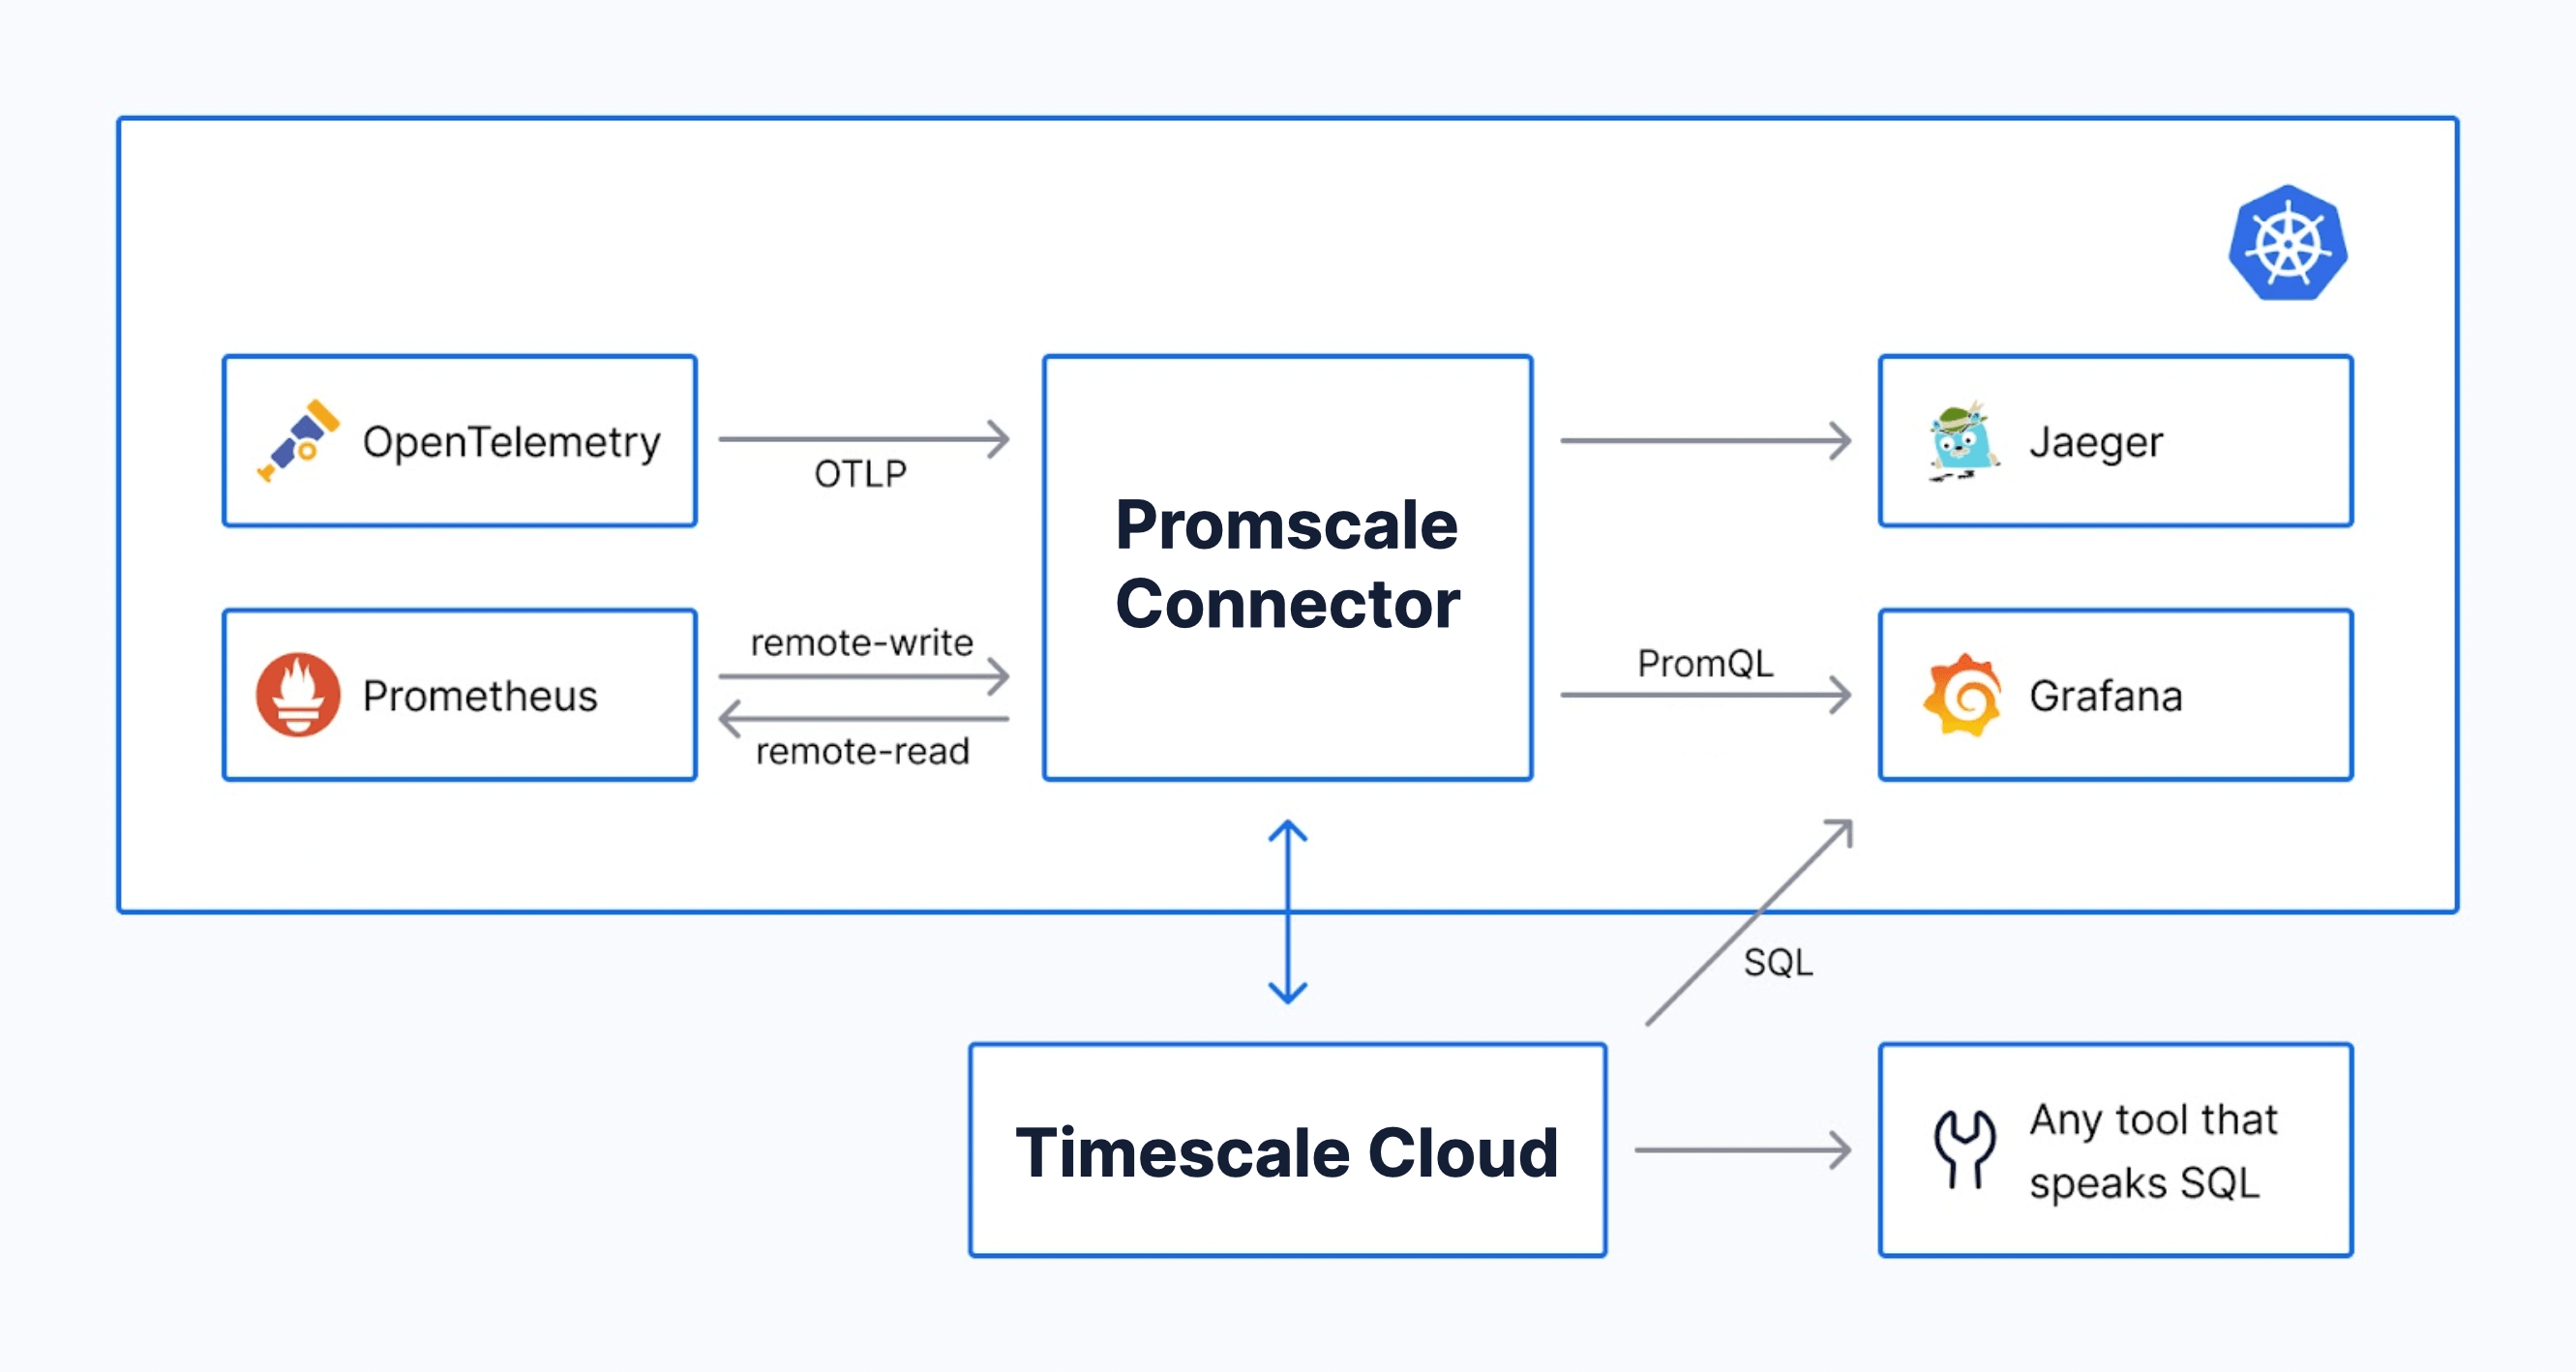 Architecture diagram showing an observability stack with Timescale Cloud as the backend, where OpenTelemetry, Prometheus, Promscale, Jaeger, and Grafana are running in a Kubernetes cluster.